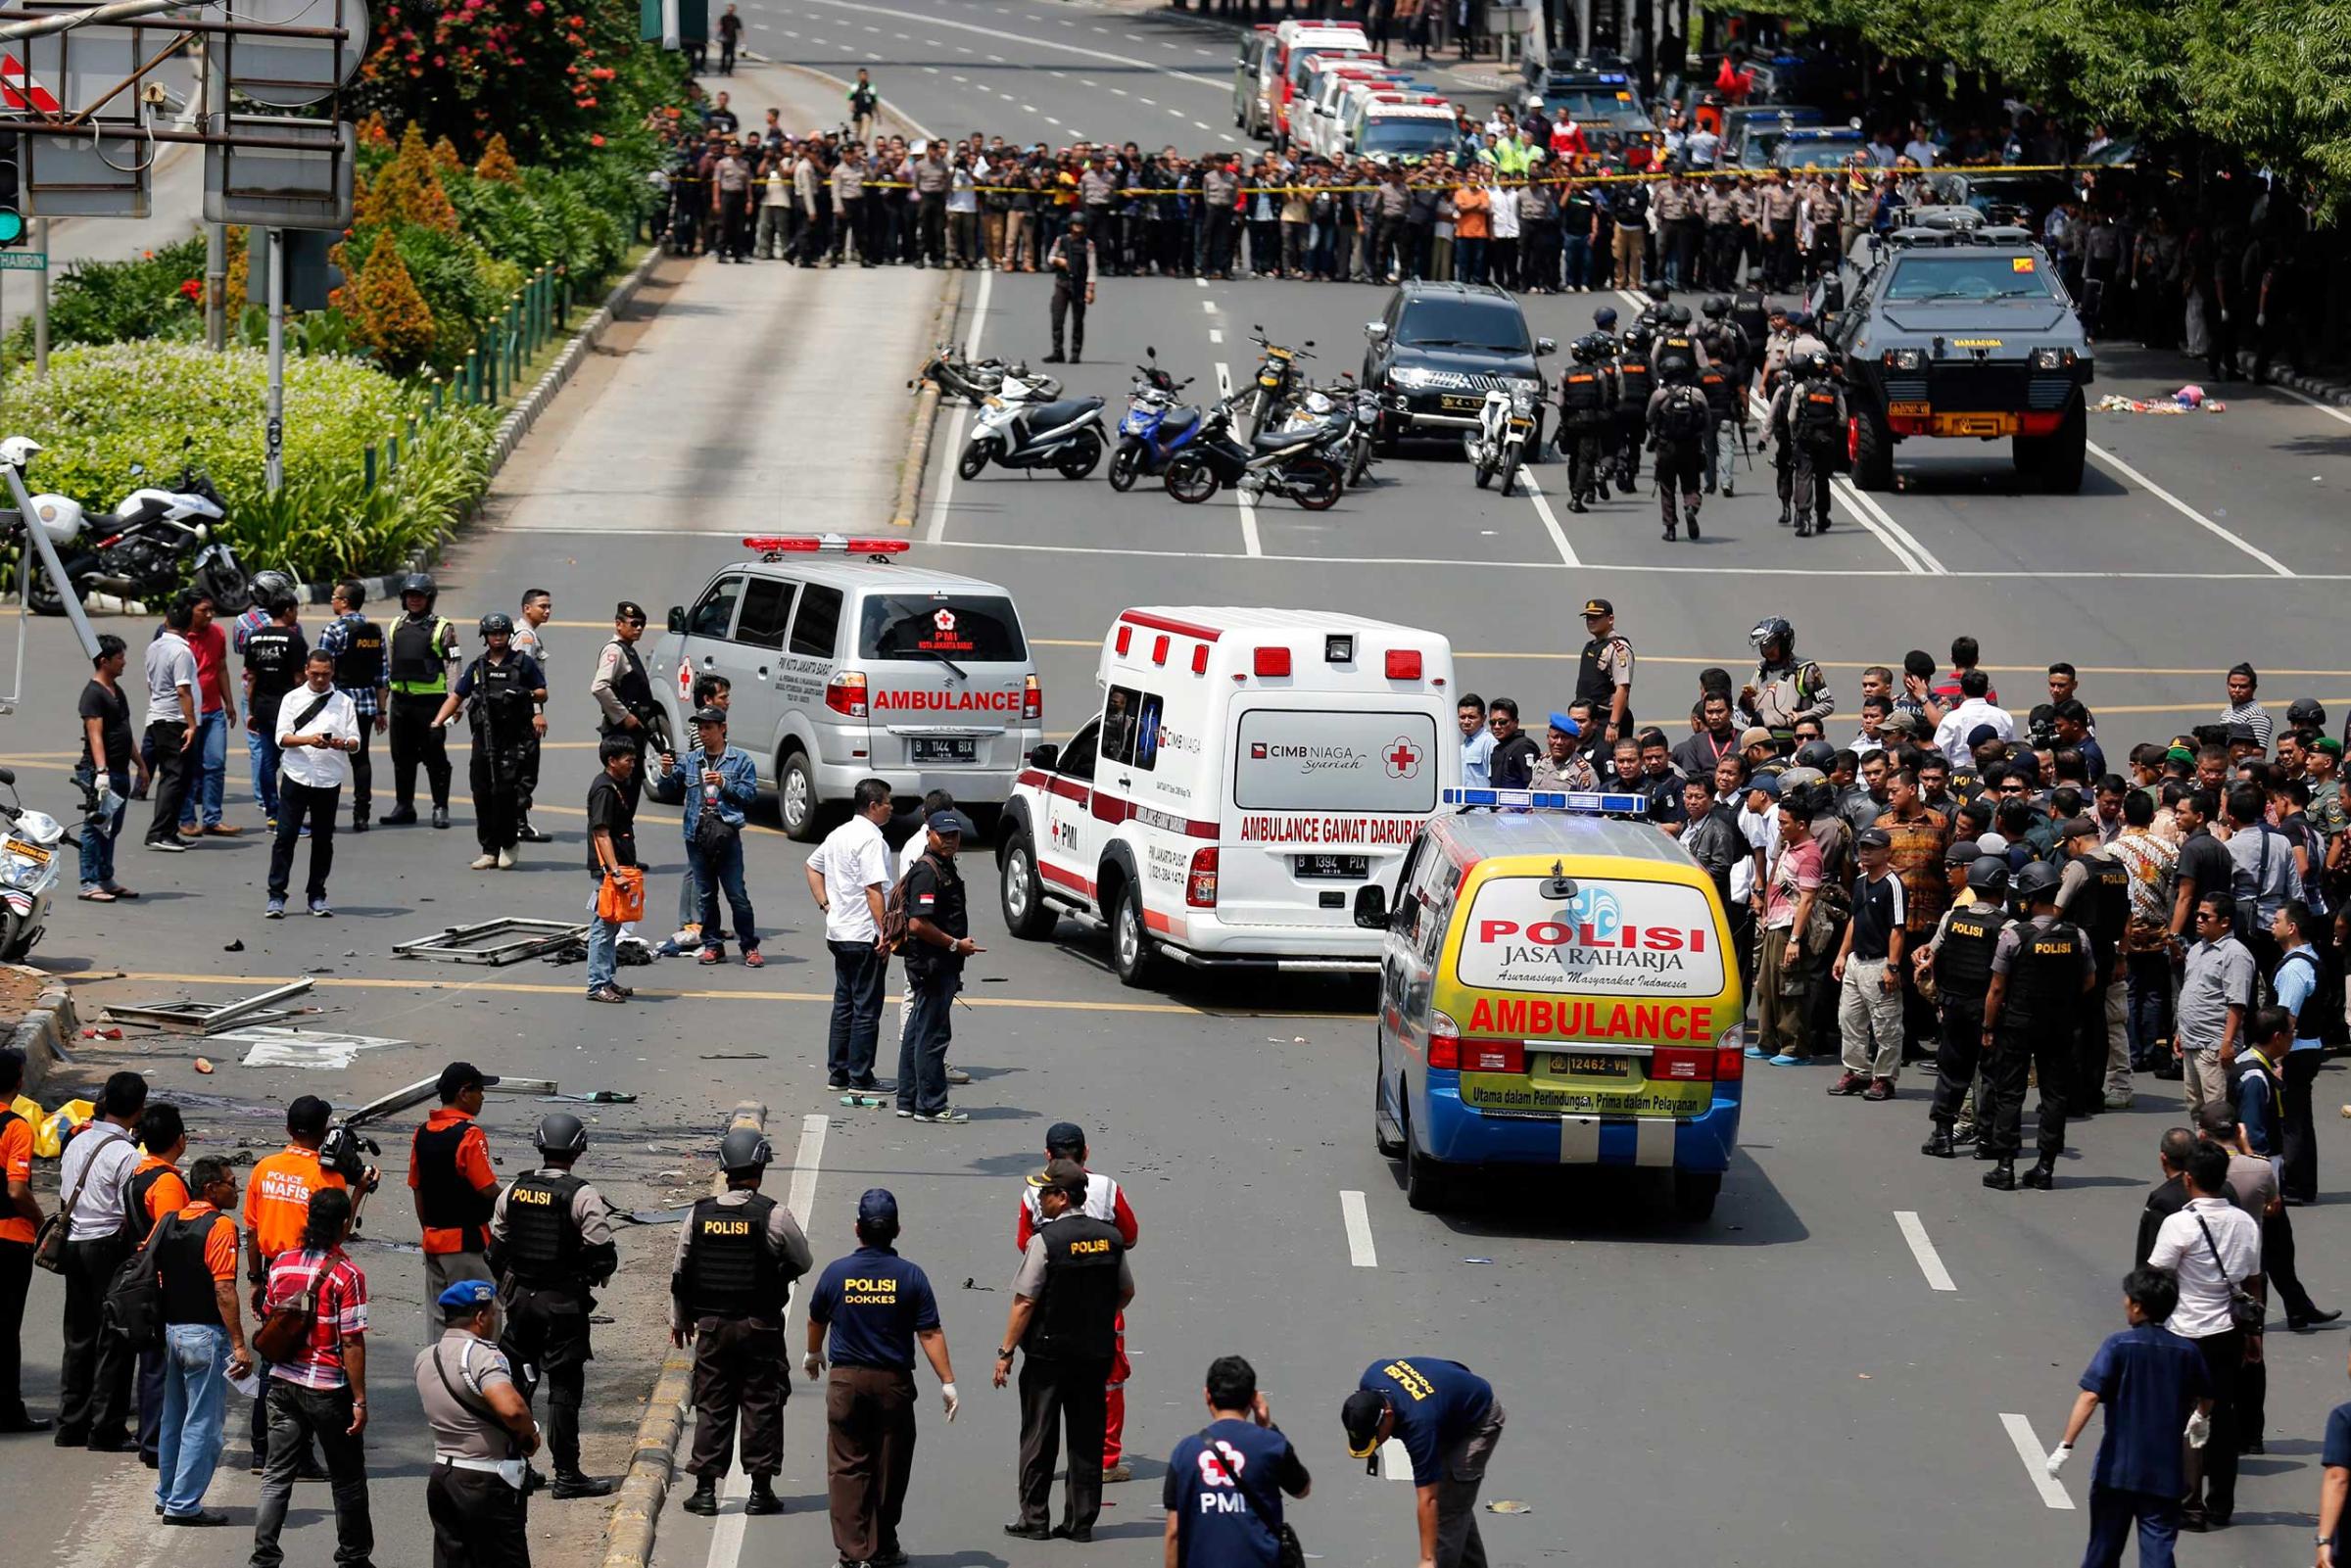 Police ambulances pass the crowds carrying victims to the hospital after a bomb blast in front of a shopping mall in Jakarta, Indonesia, Jan. 14, 2016.